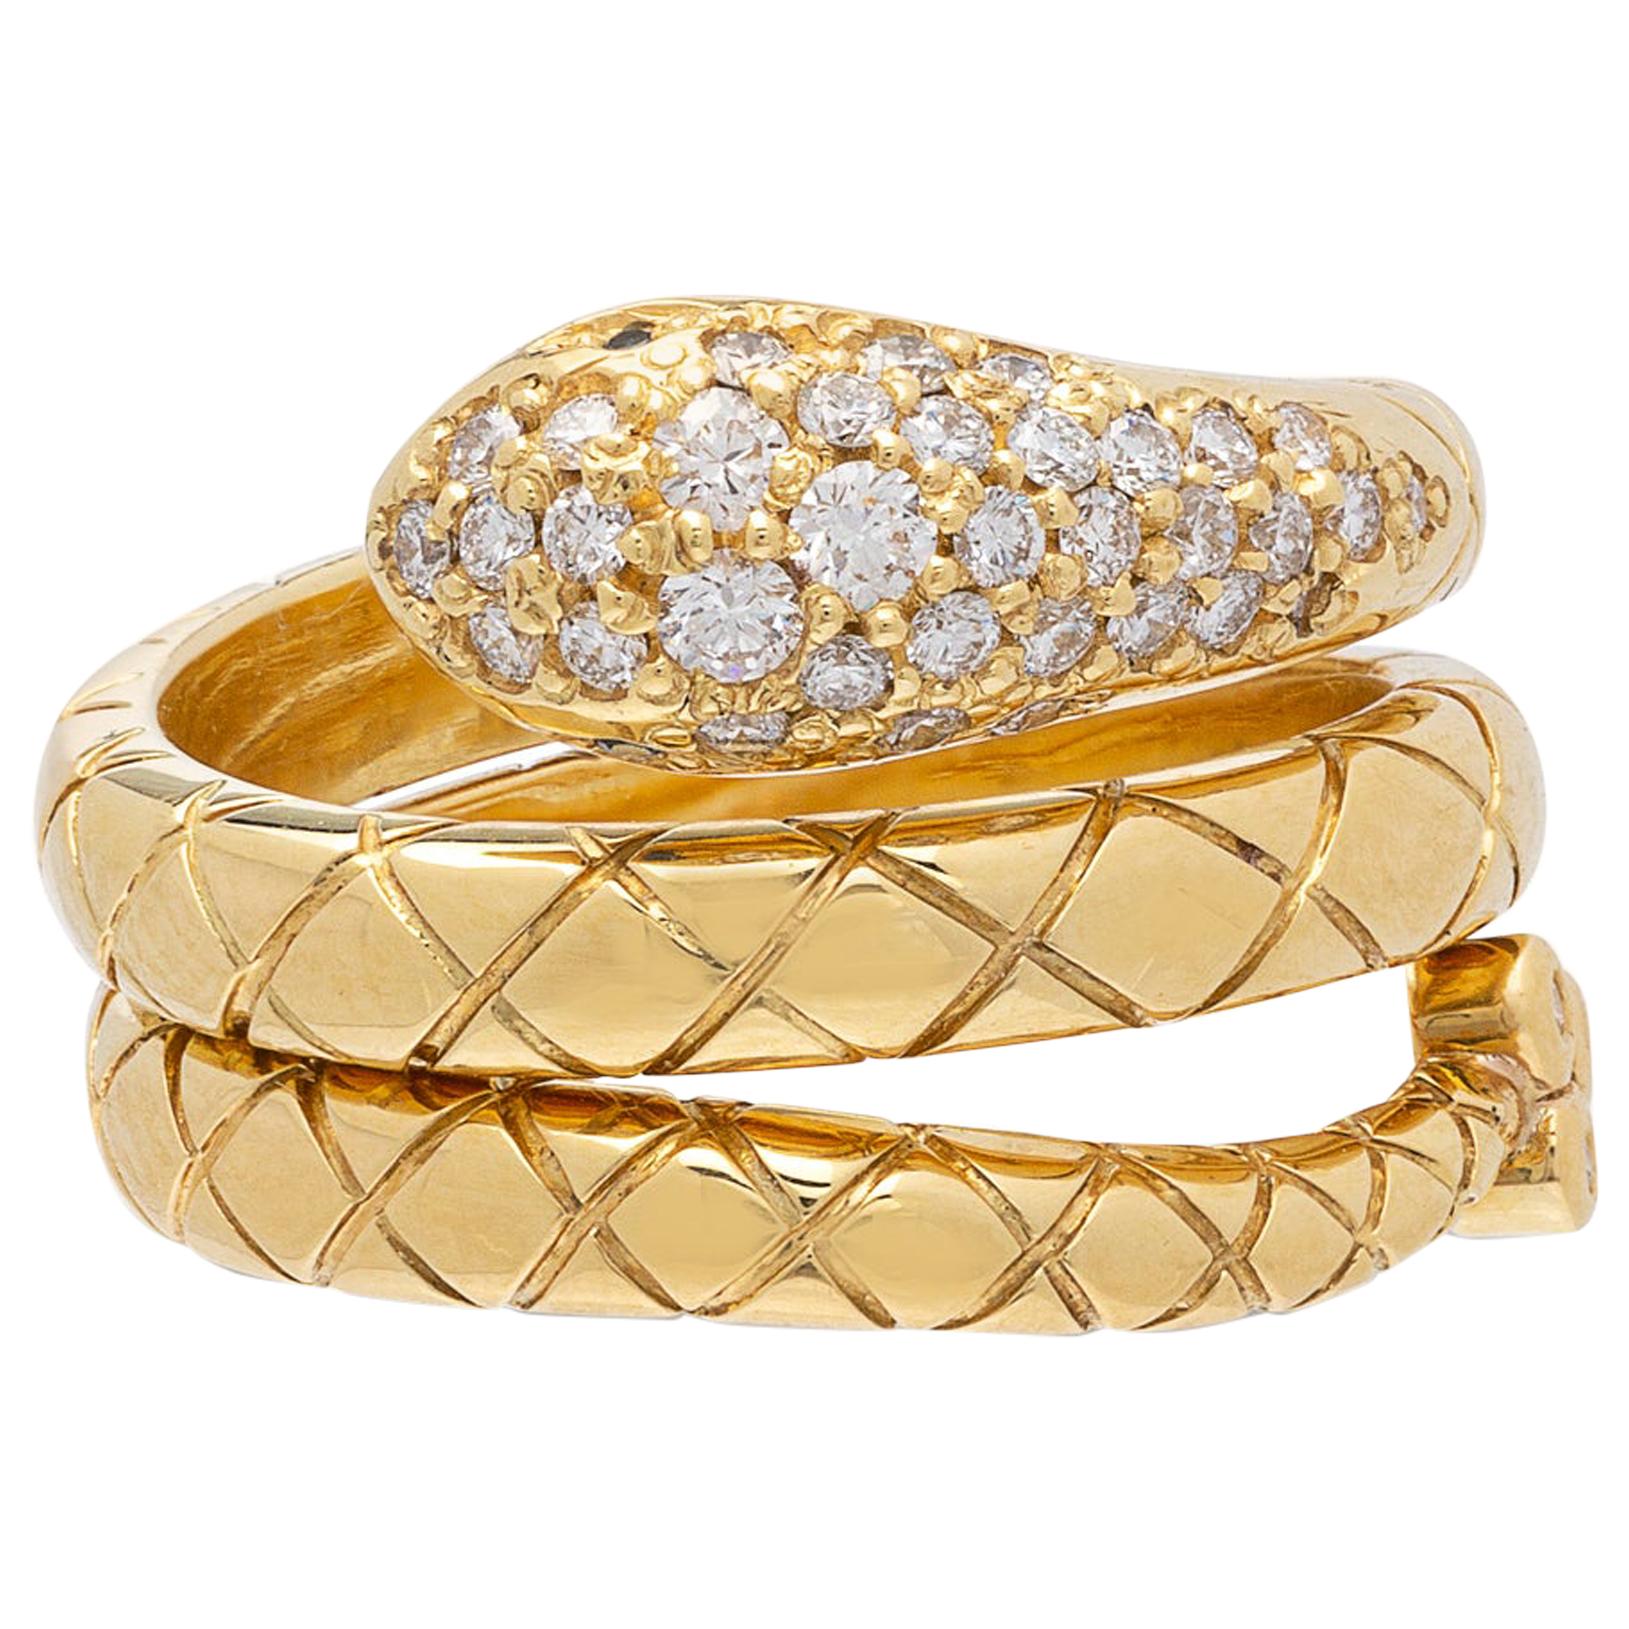 Temple St. Clair Diamond and Gold Snake Ring